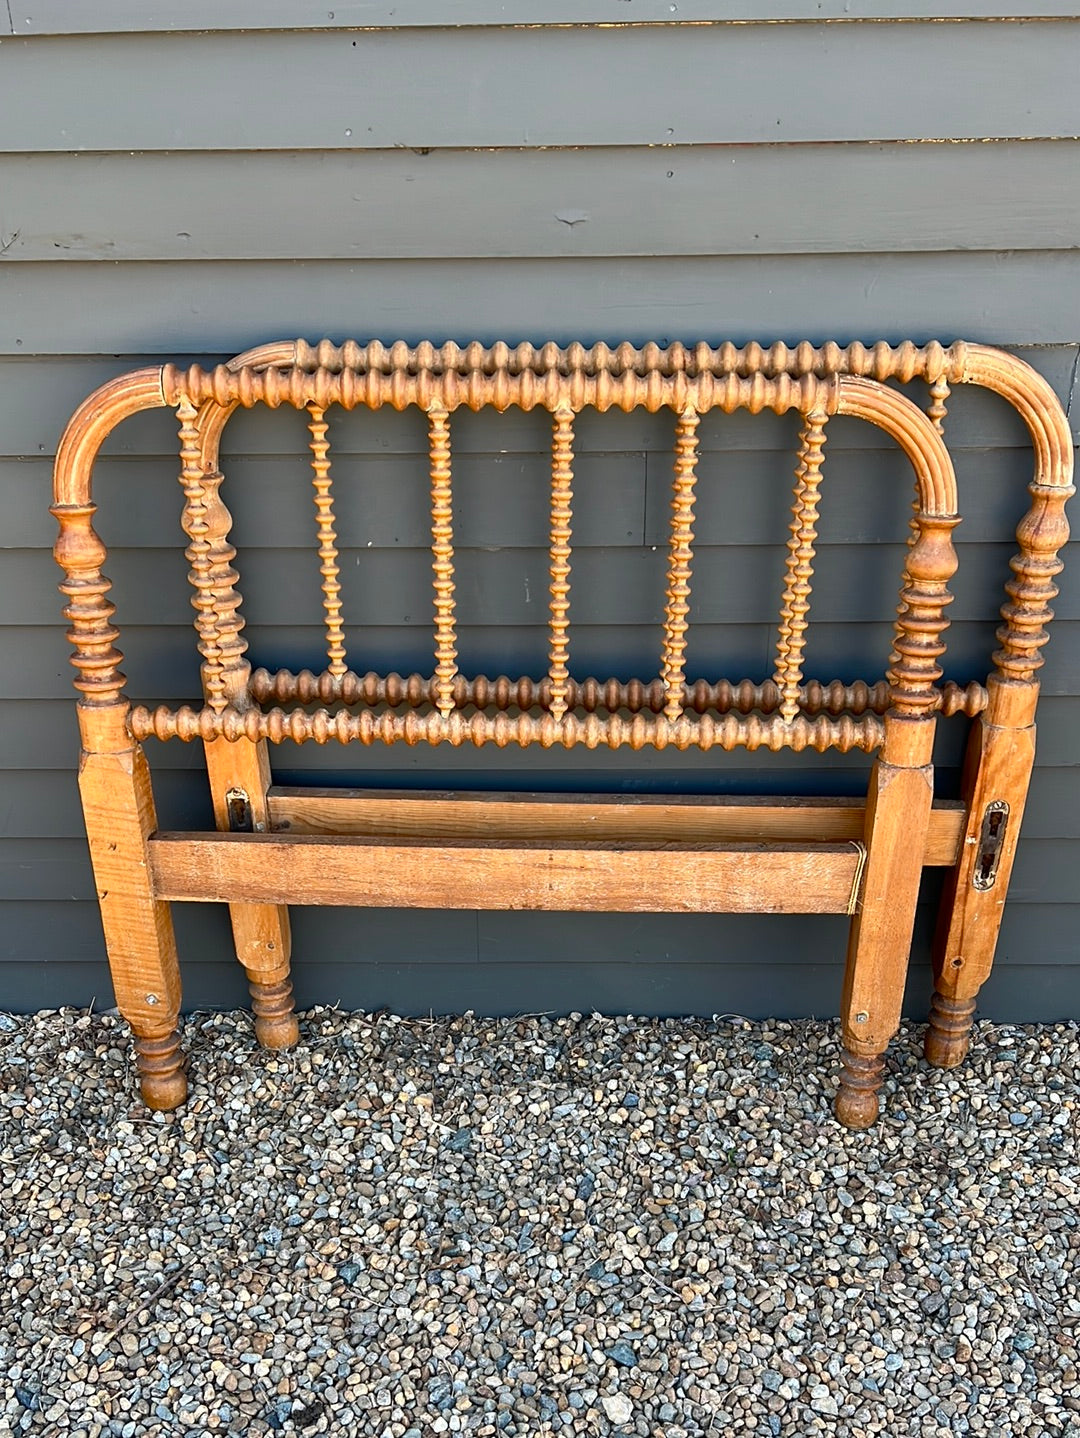 Antique Spindle Twin Bed Frame